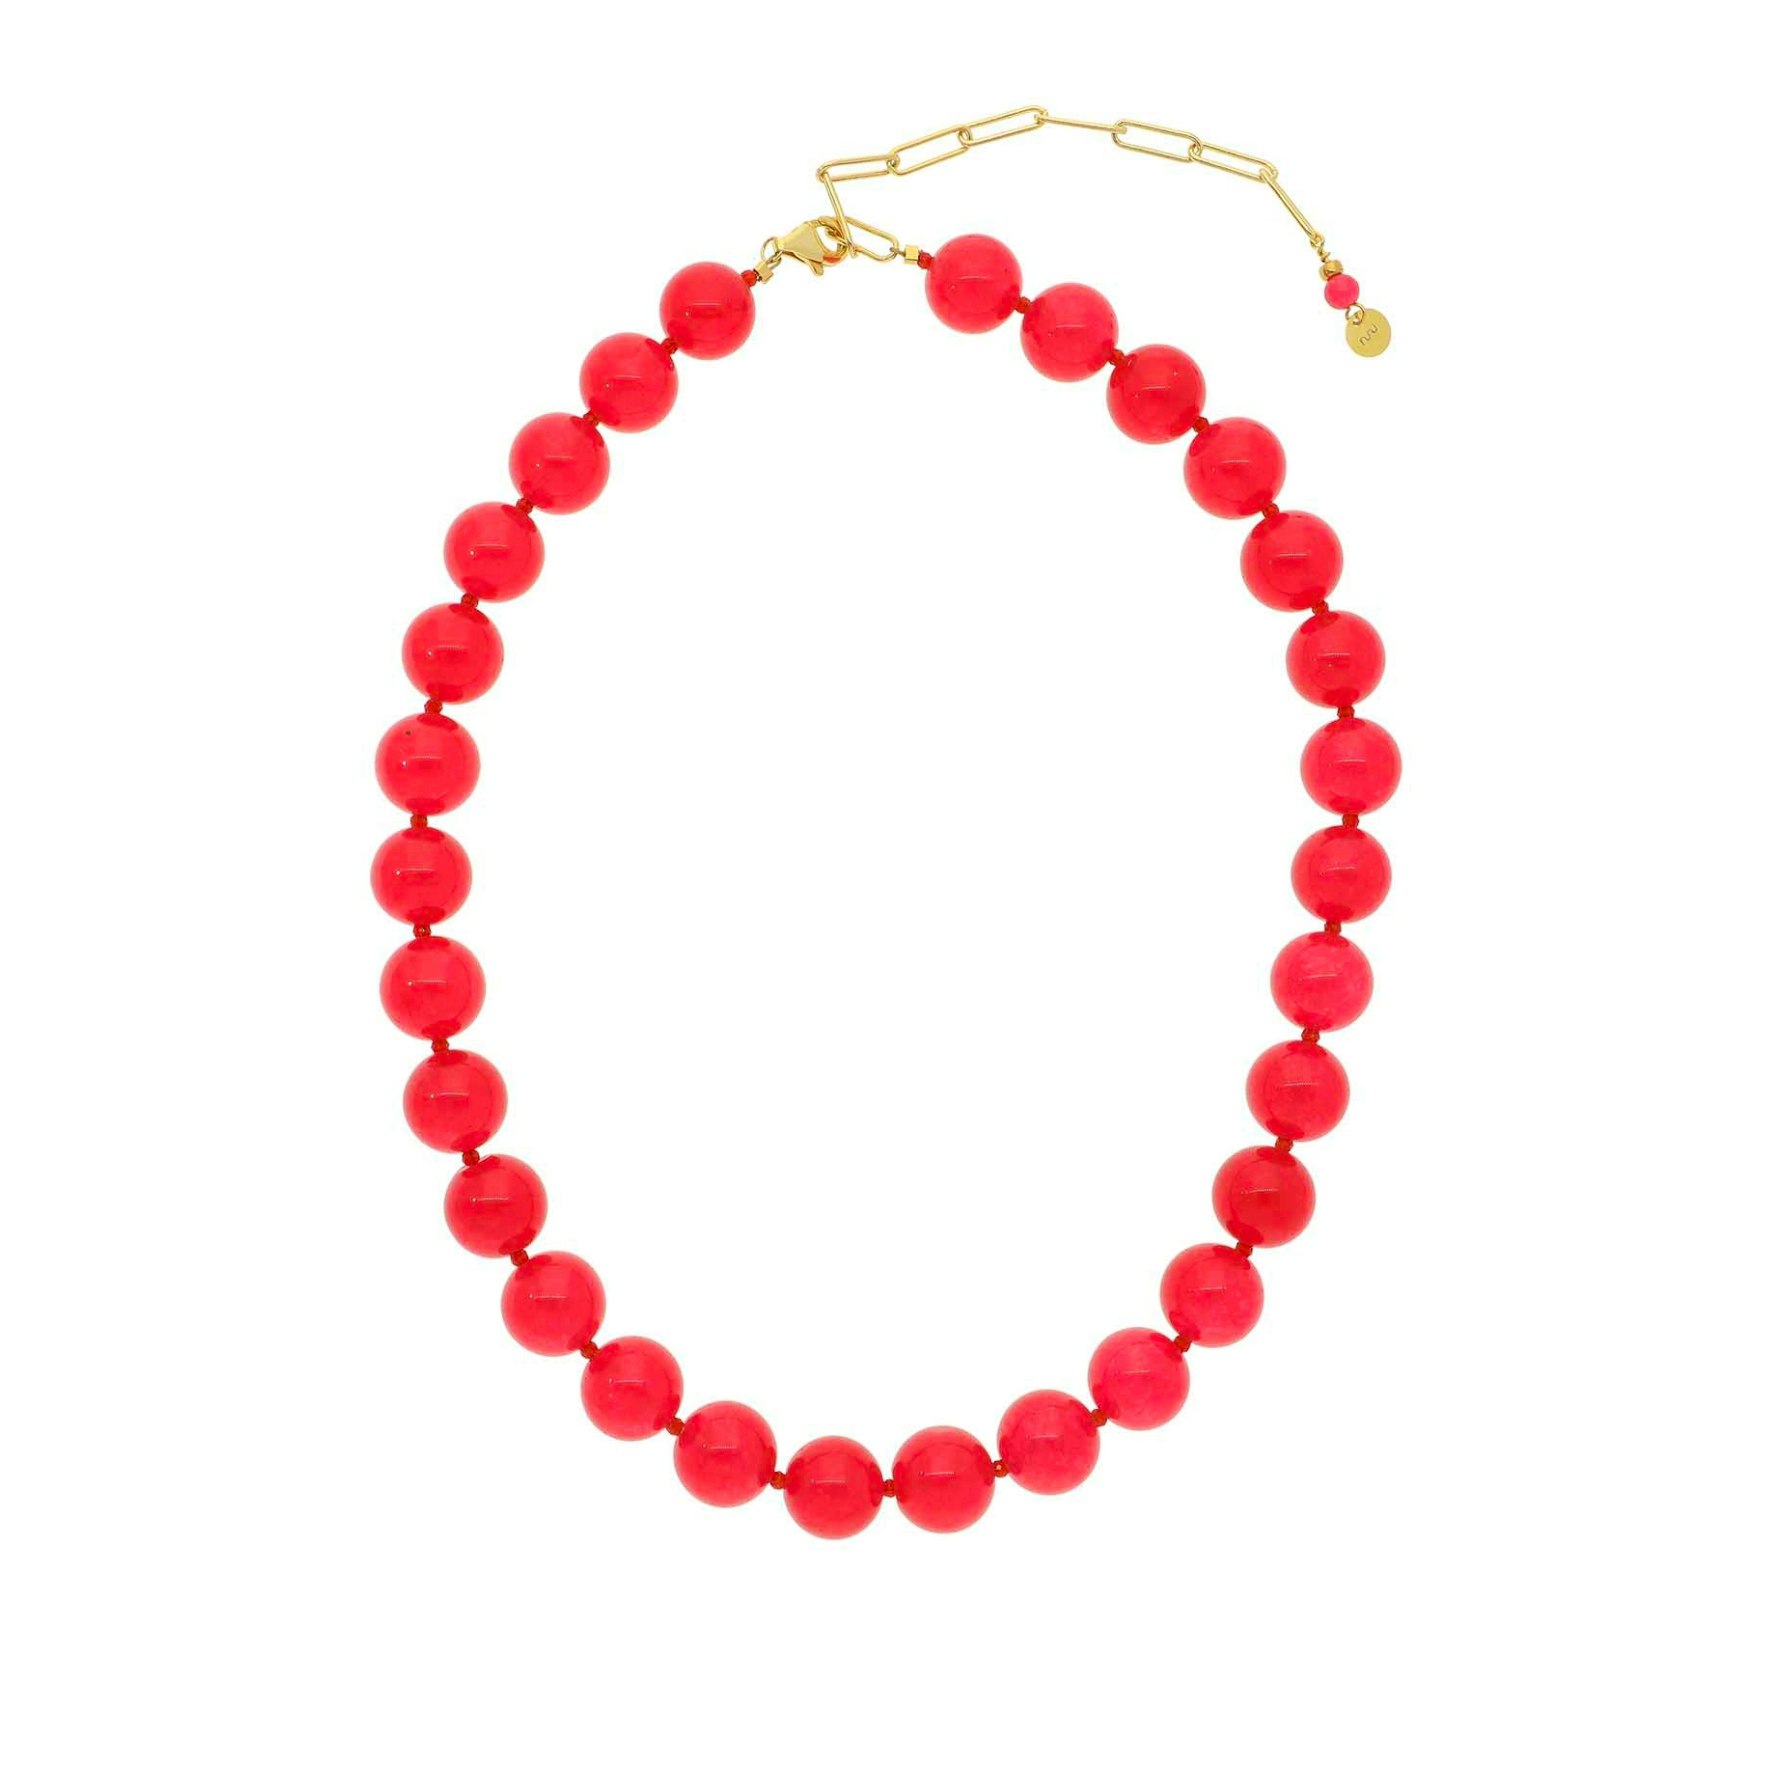 Jasmin Necklace Coral from Nuni Copenhagen in Goldplated Silver Sterling 925